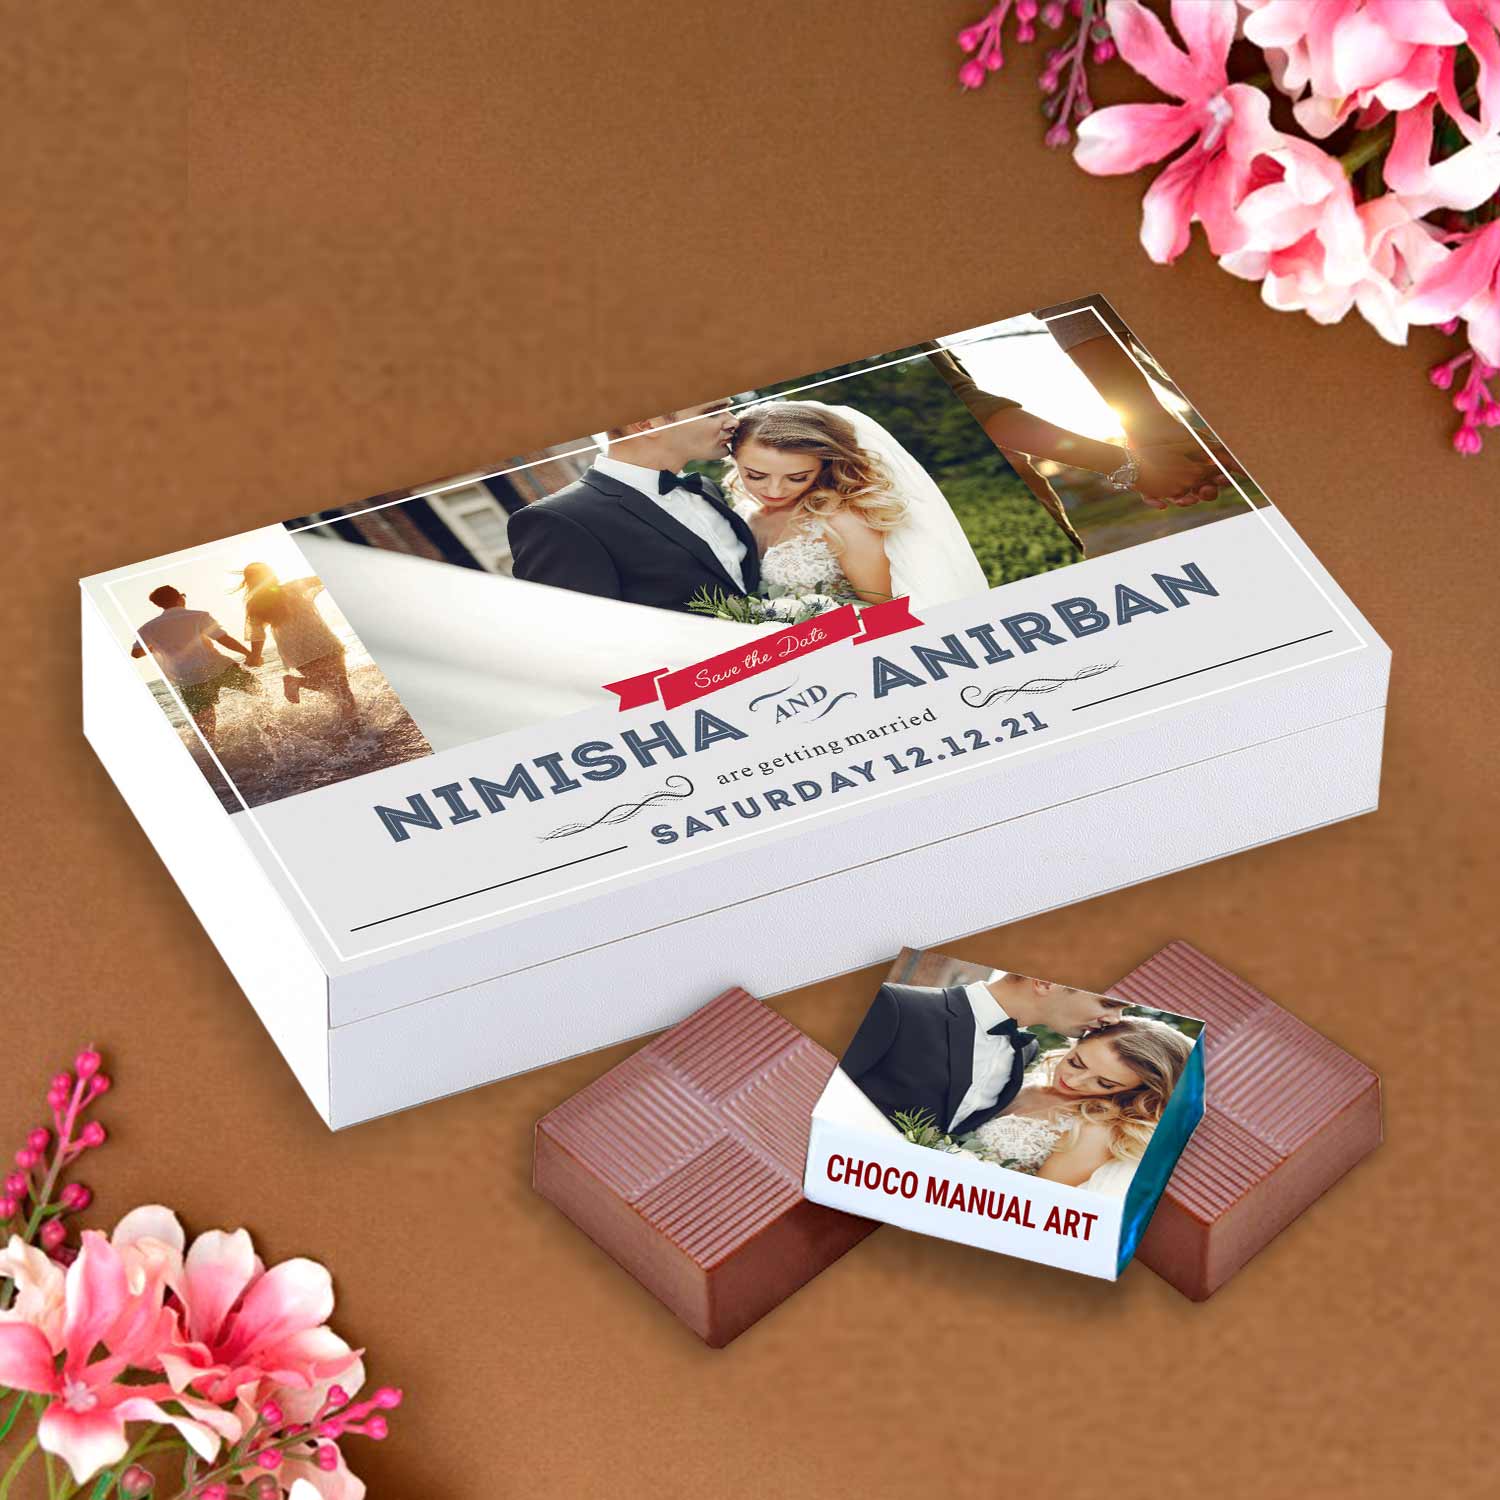  Customized white wooden box with all wrapper printed chocolates. There is also a personalized message printed on Message paper inside the box.